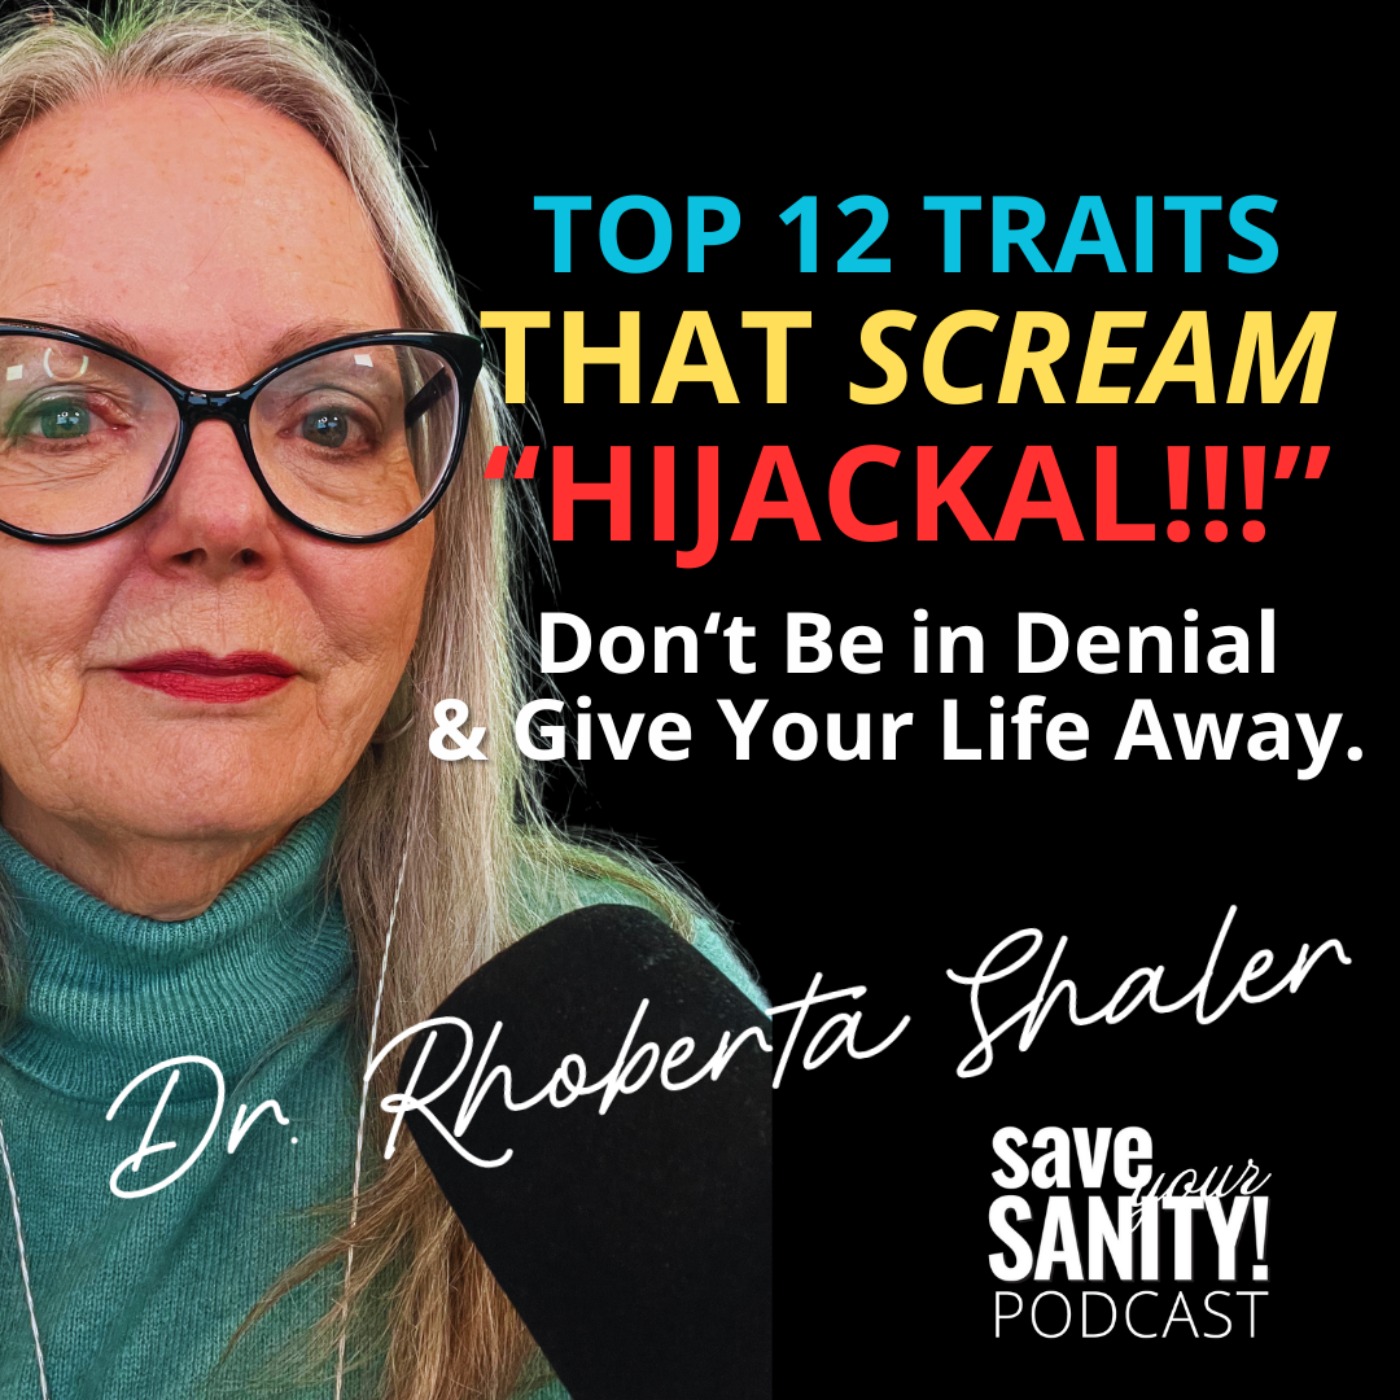 cover art for Top 12 Traits That Scream Hijackal!!! Don't Be in Denial.